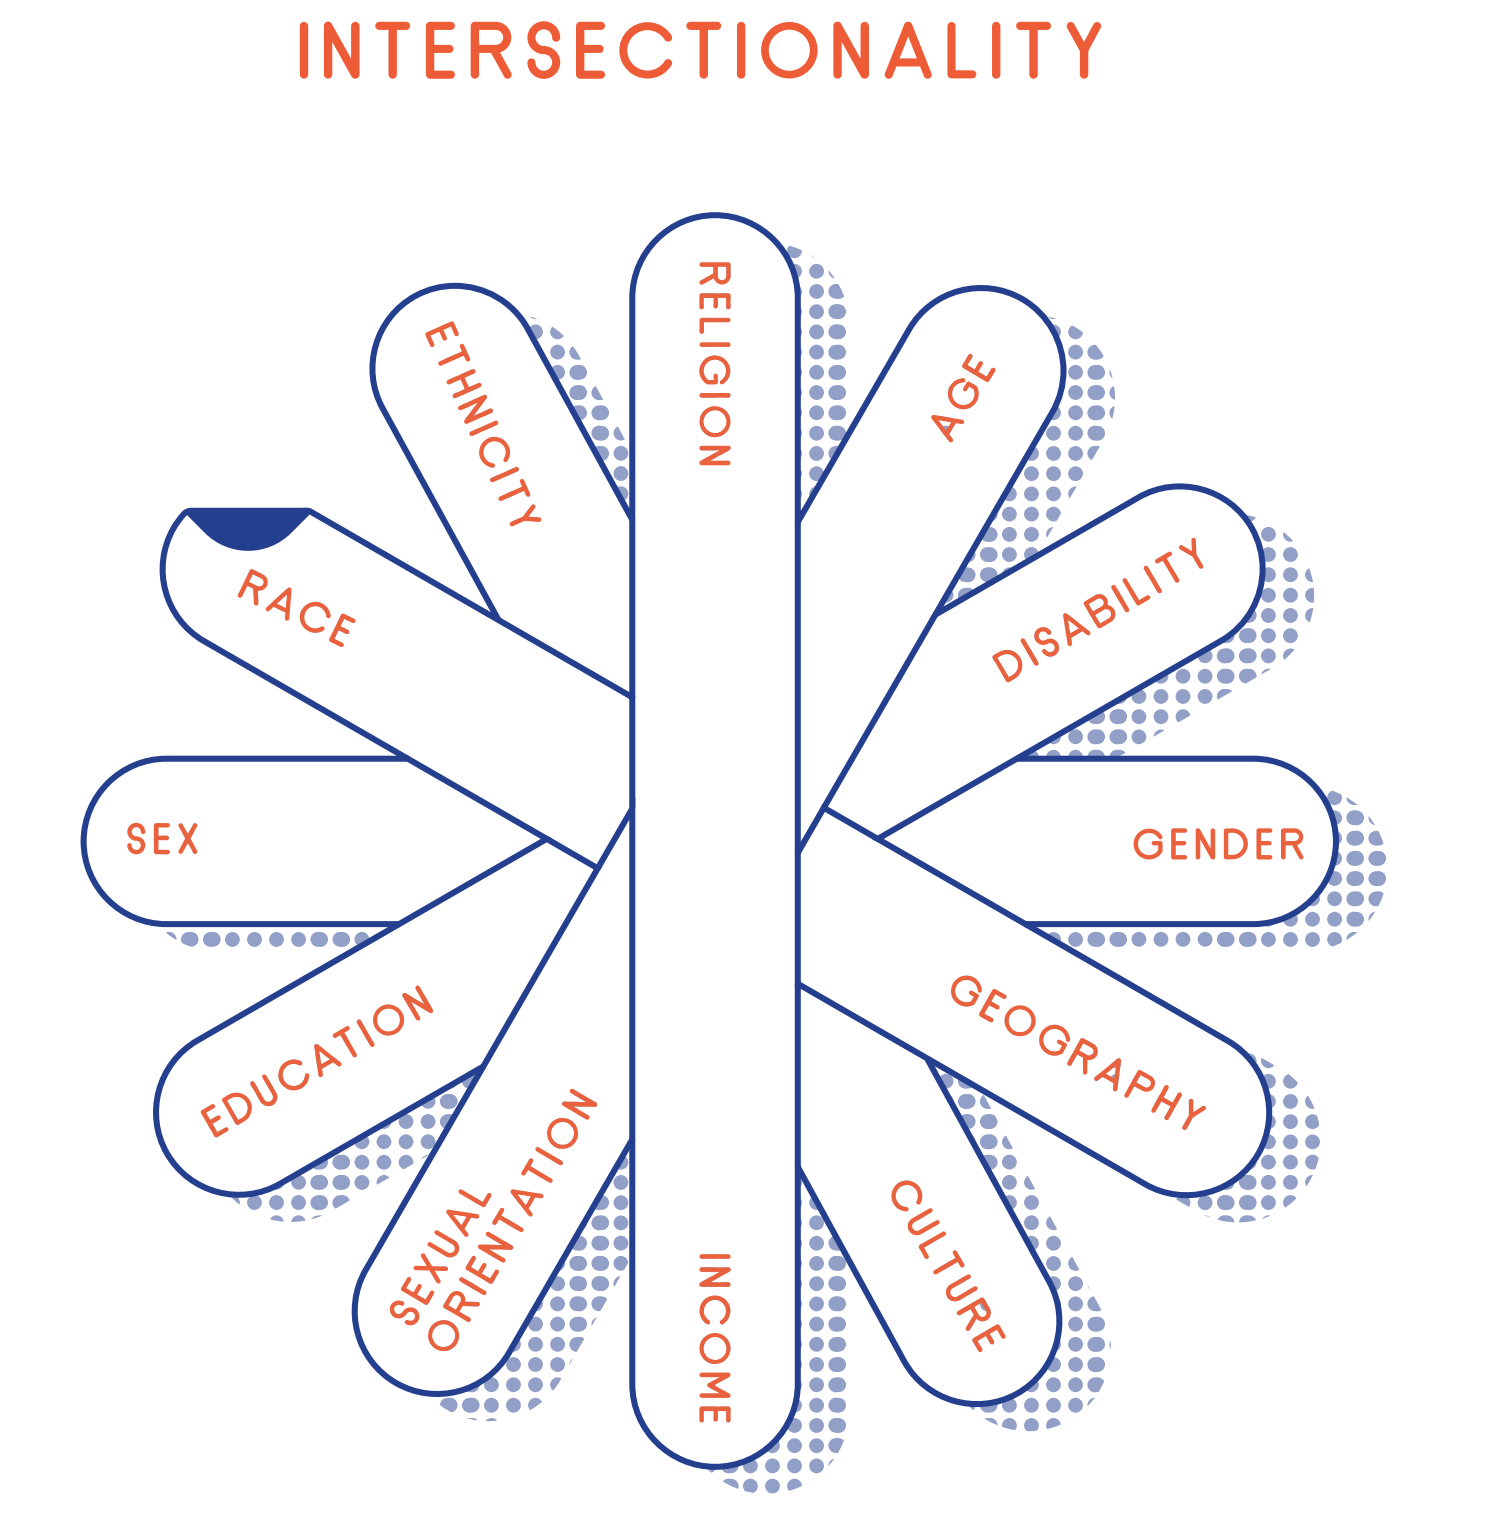 graphic of intersectionality (link to file)